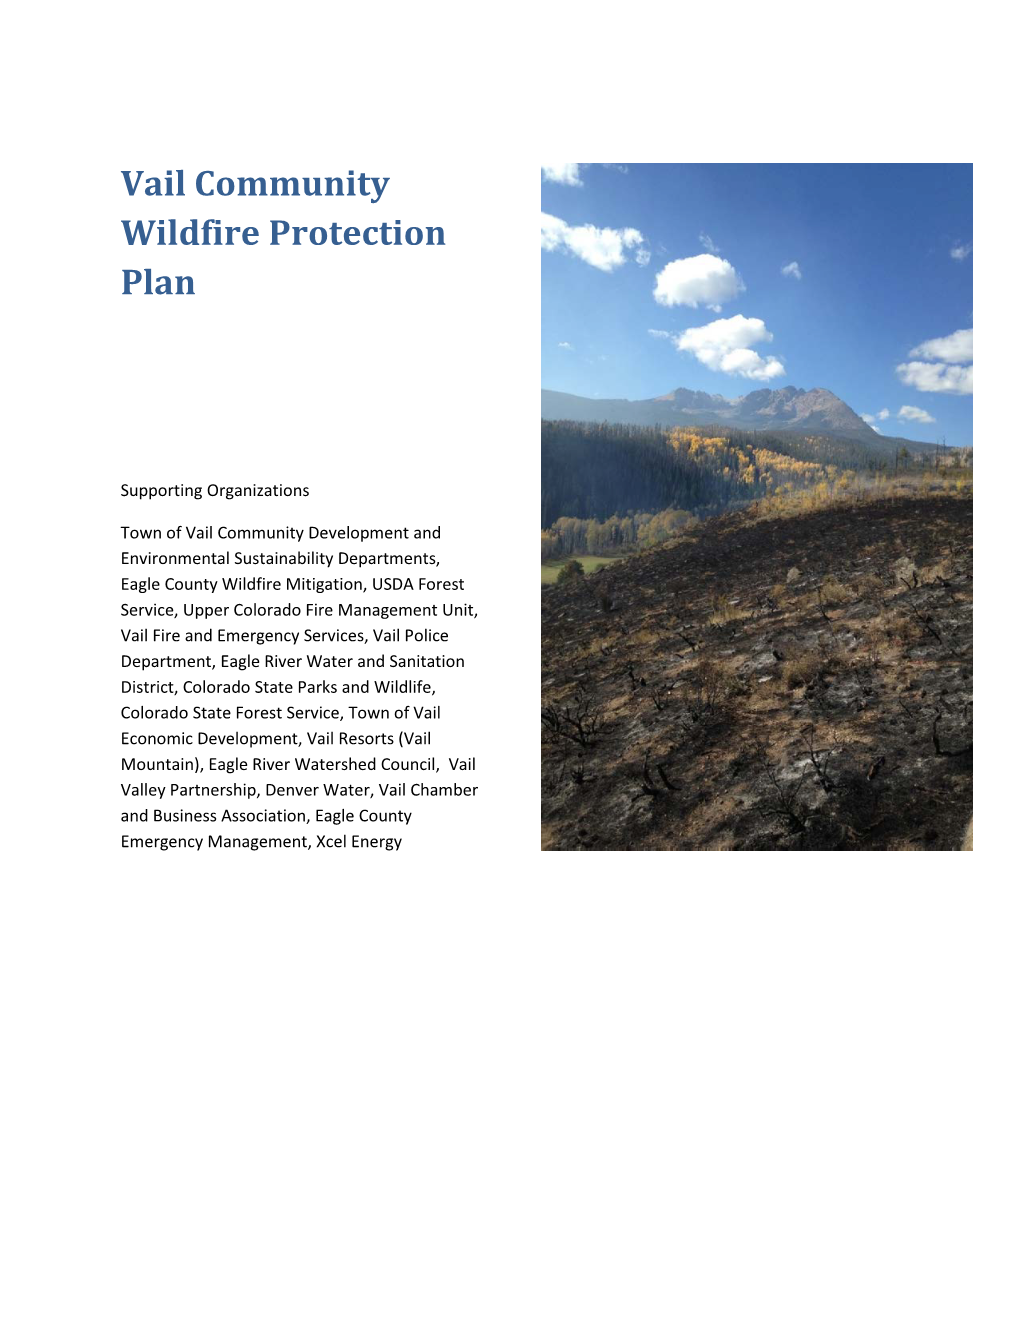 Vail Community Wildfire Protection Plan